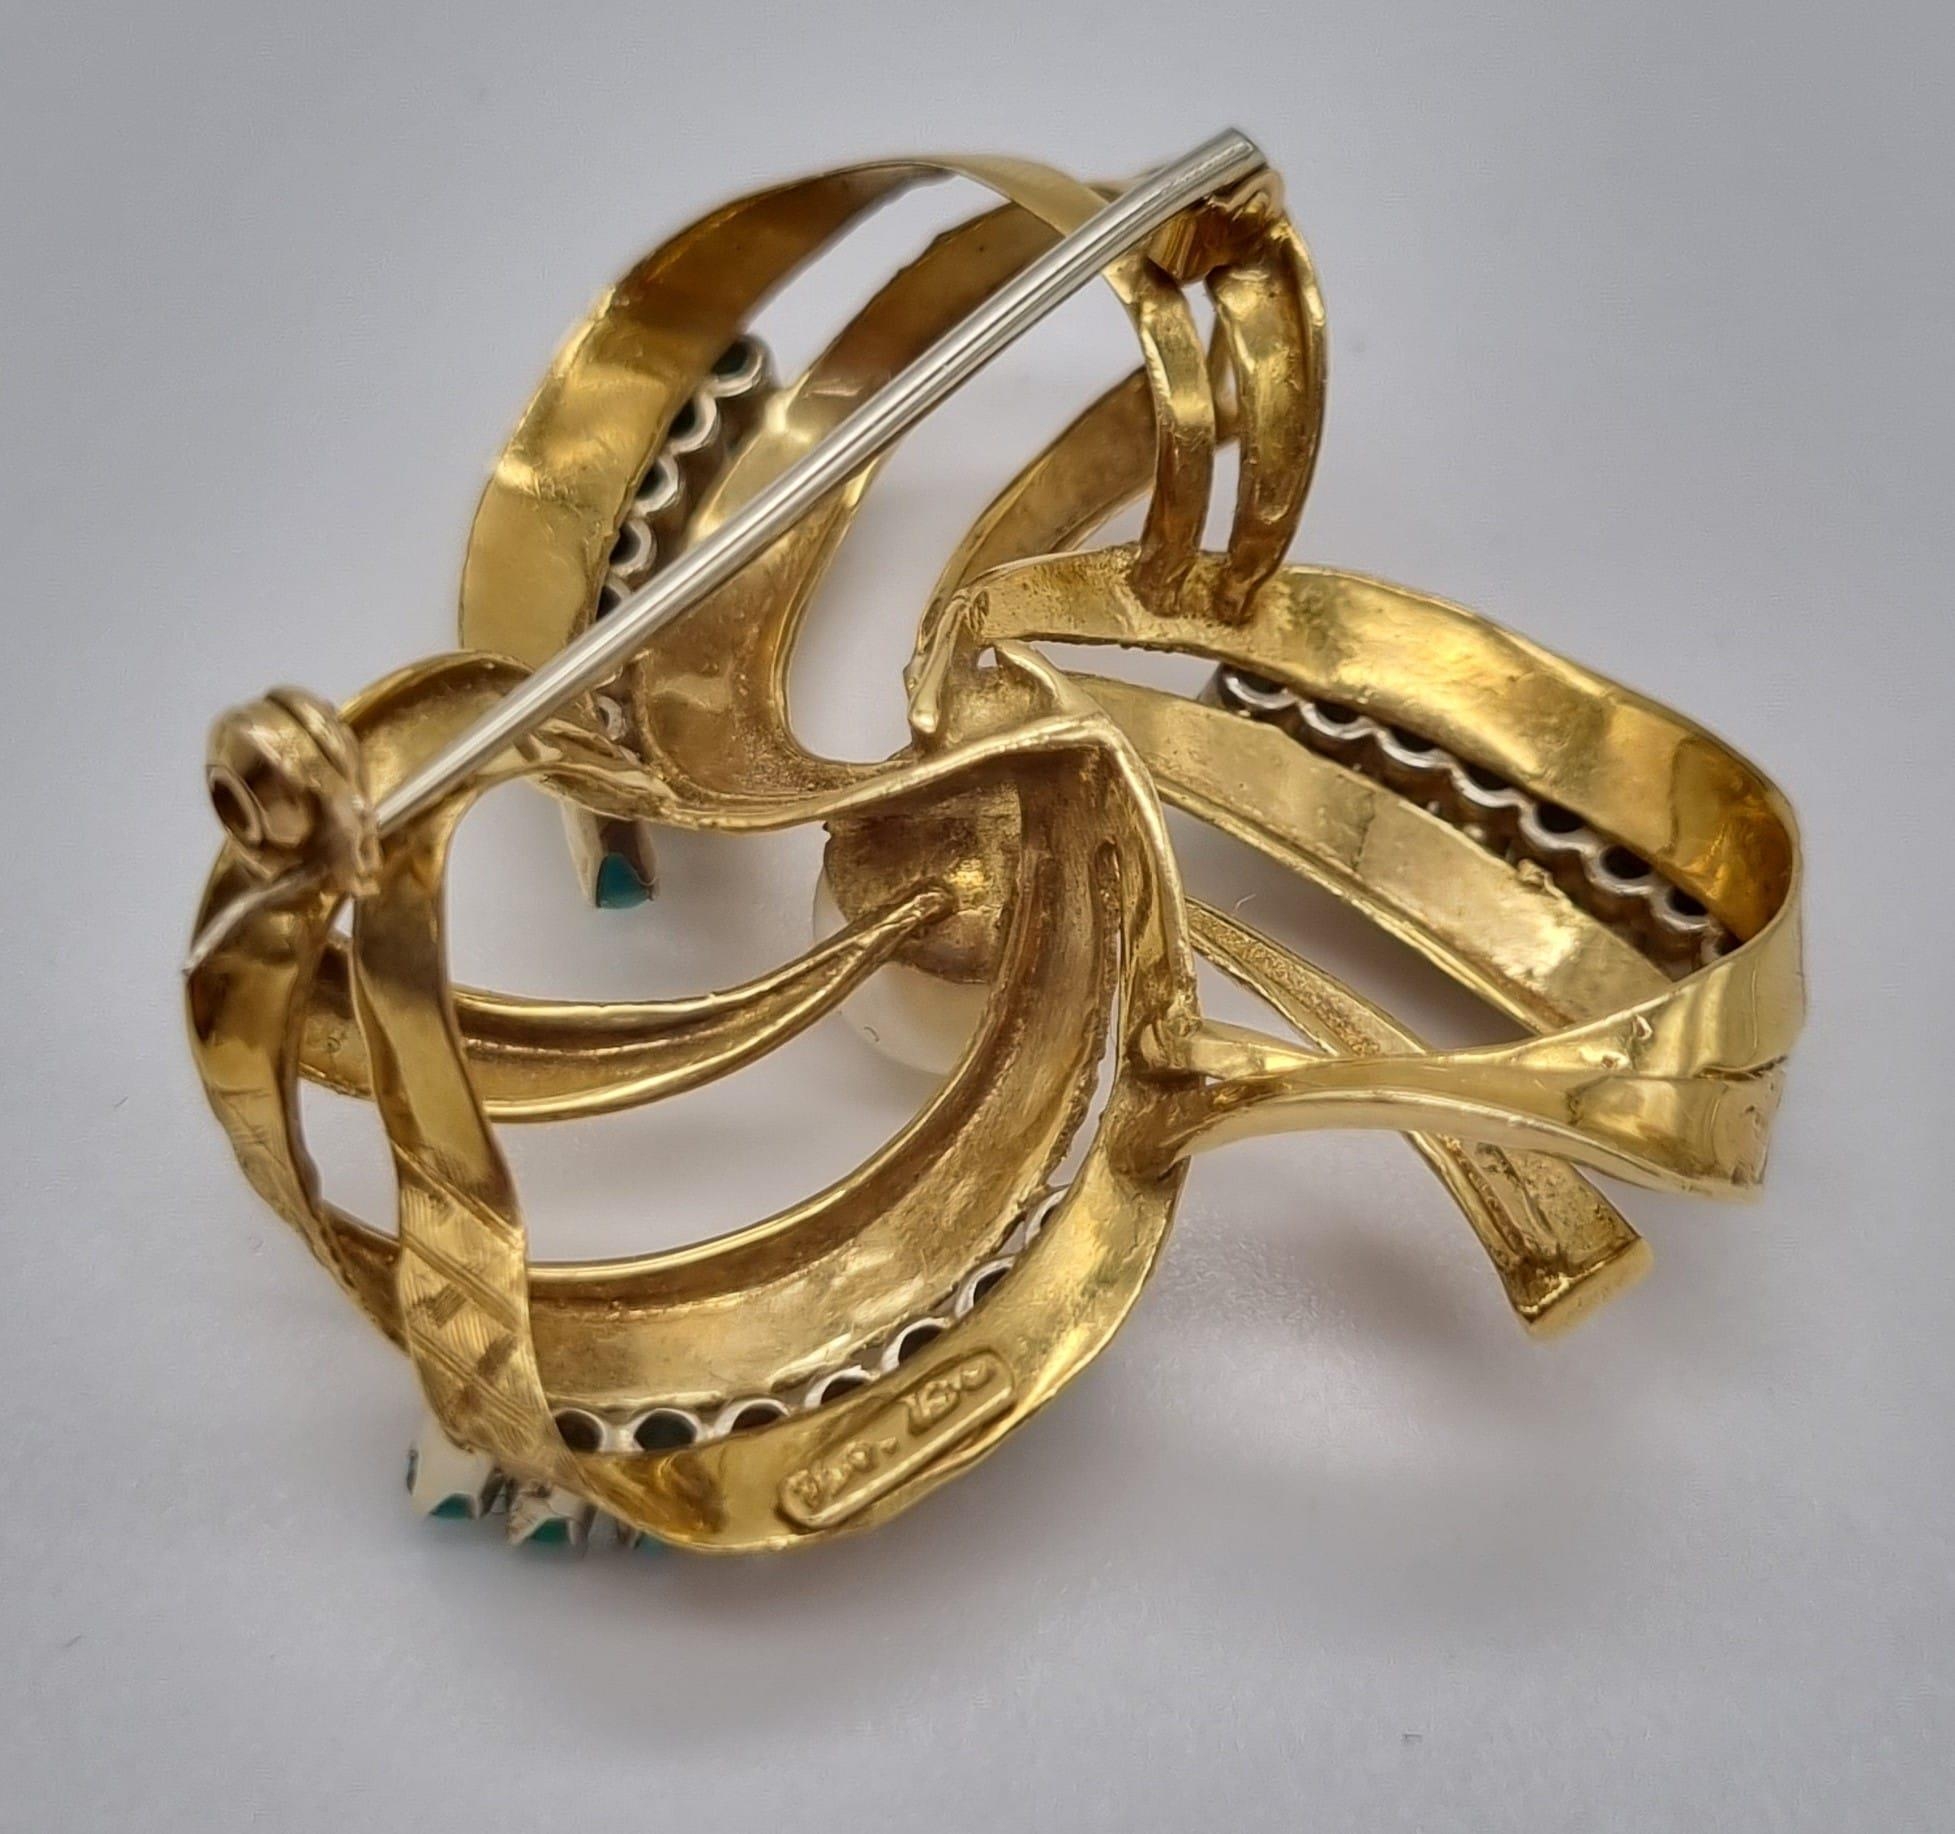 A Wonderful Vintage Possibly Antique 18K Yellow Gold, Turquoise and Pearl Ring/Brooch Set. Ring - - Image 12 of 13